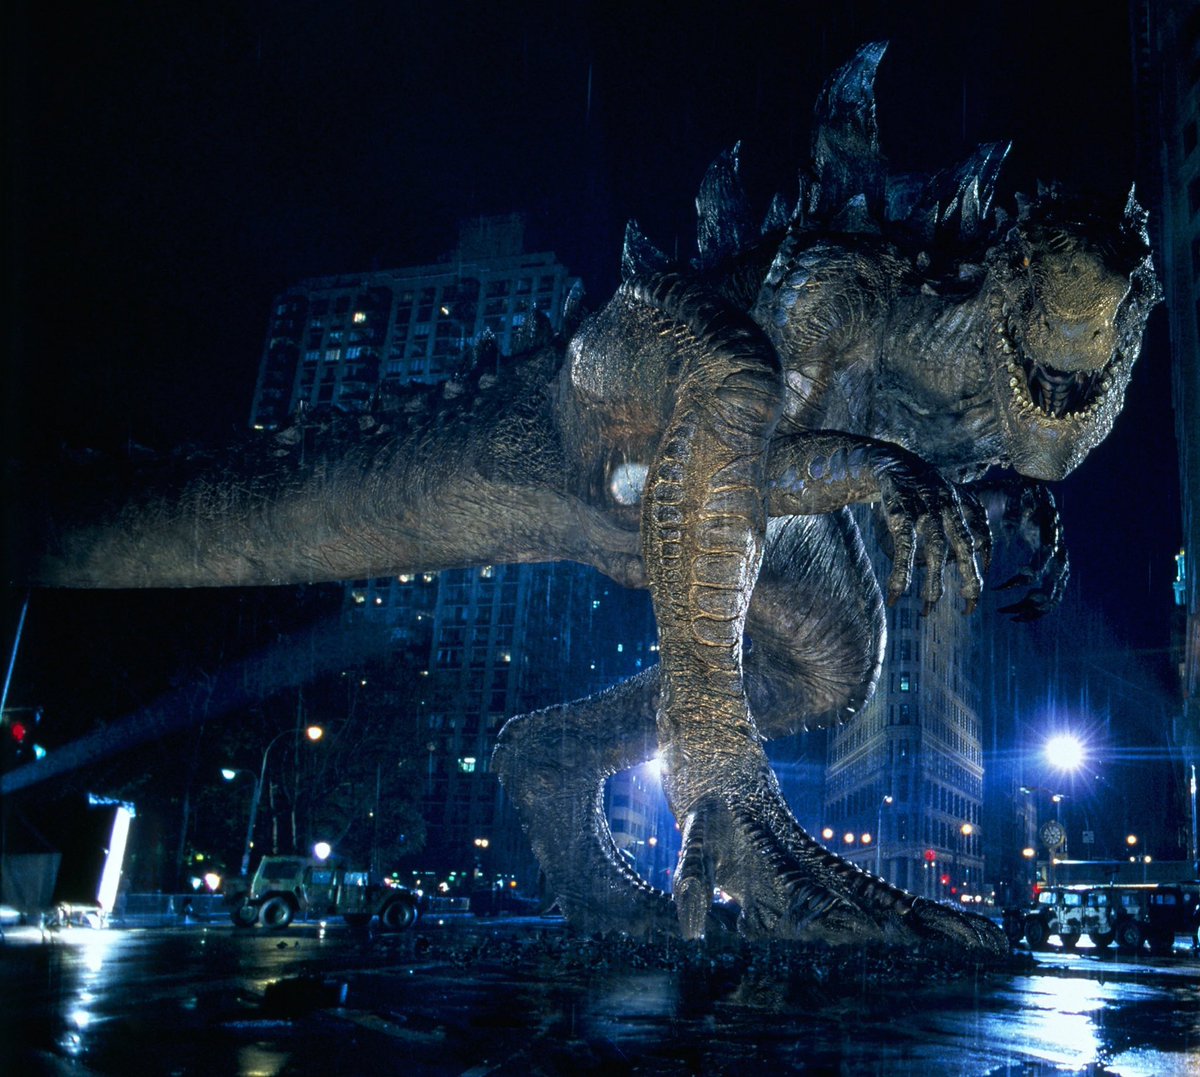 So, despite being a giant chimeric monster that threatens humanity, Godzilla is still a sympathetic character thru his positive character traits, challenges & vulnerabilities. Even tho his destruction at the film’s end had to happen for humanity to survive, it’s still tragic.